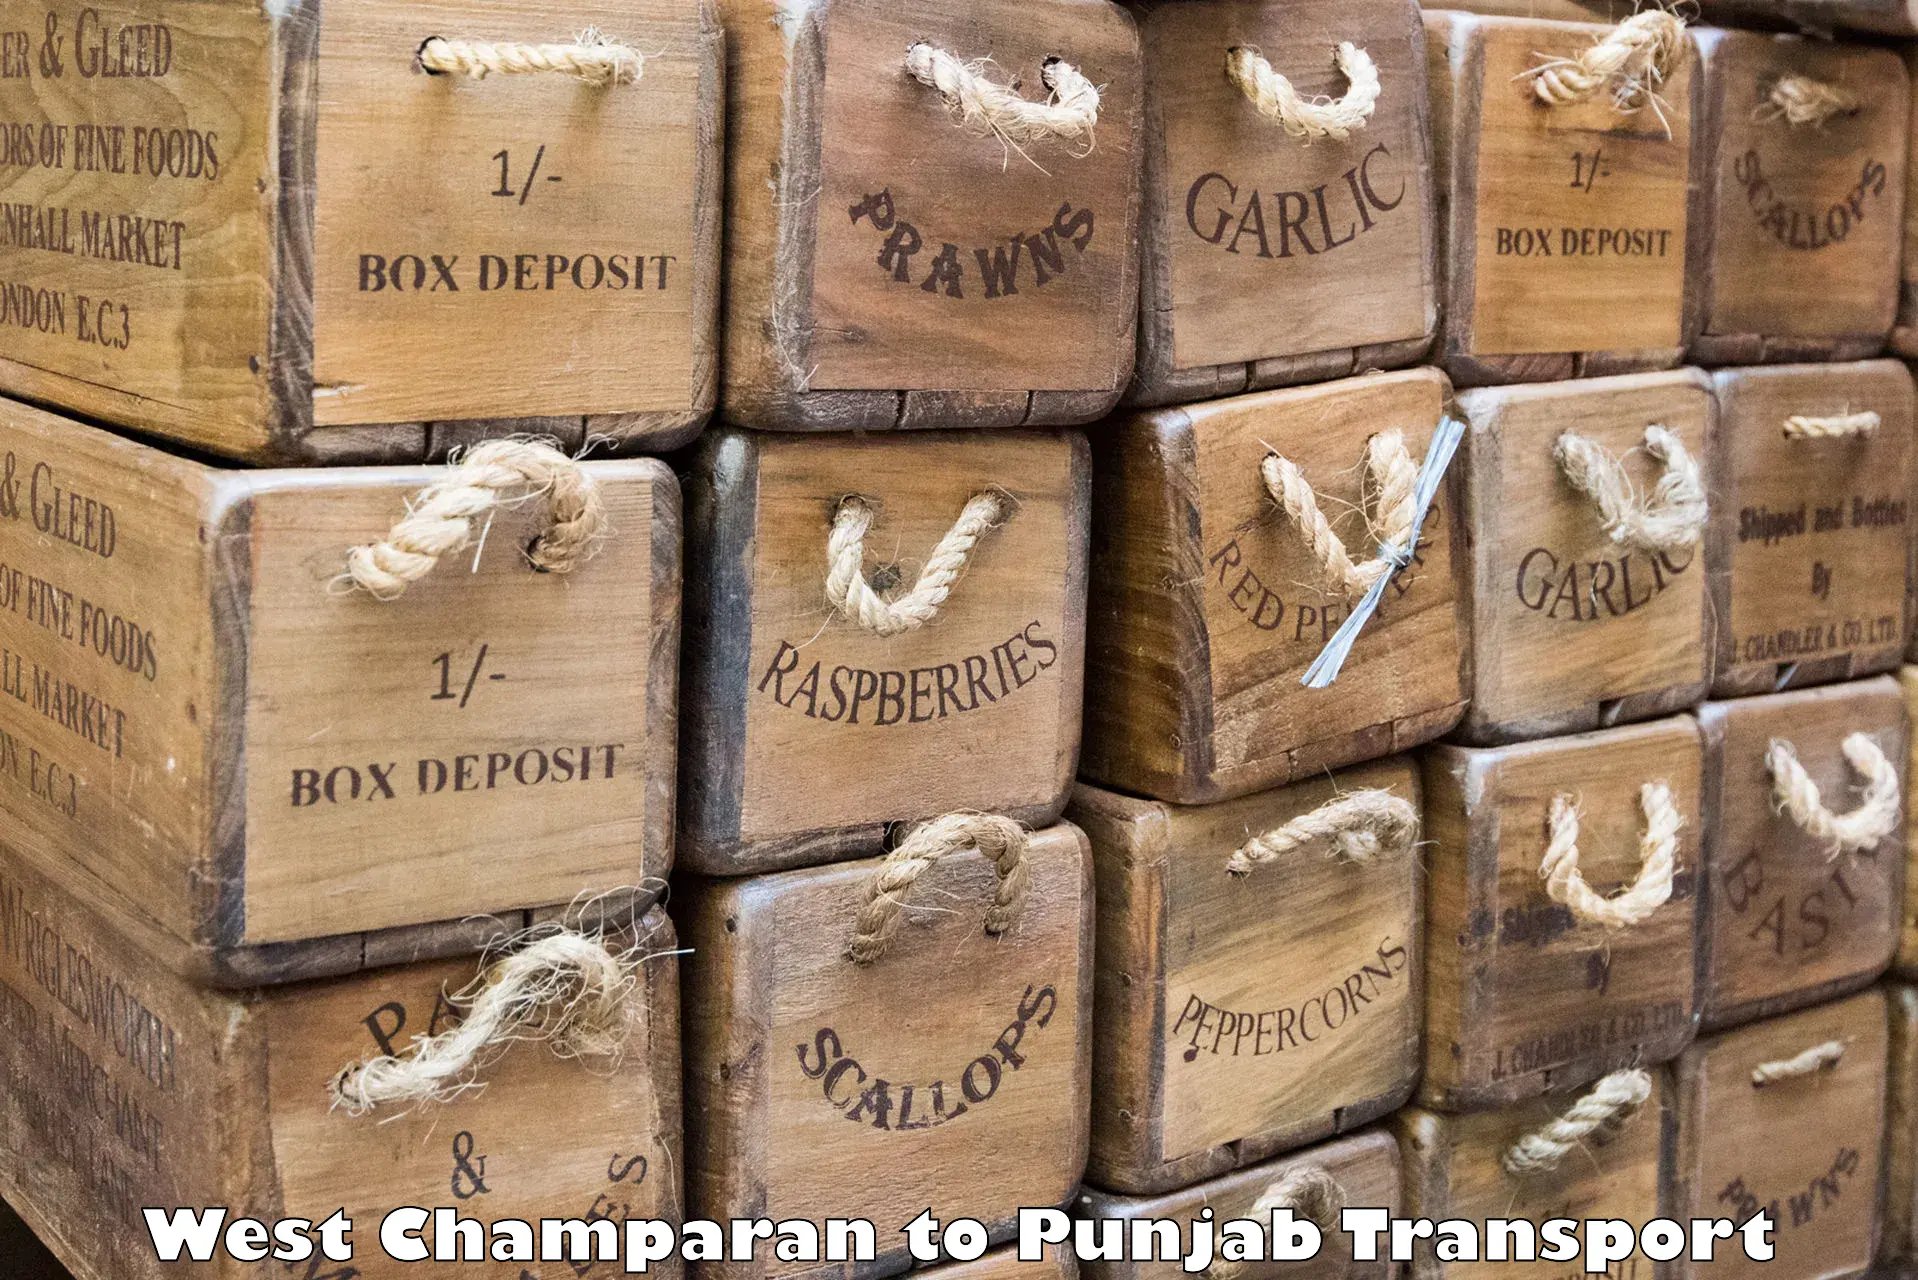 Air freight transport services West Champaran to Punjab Agricultural University Ludhiana